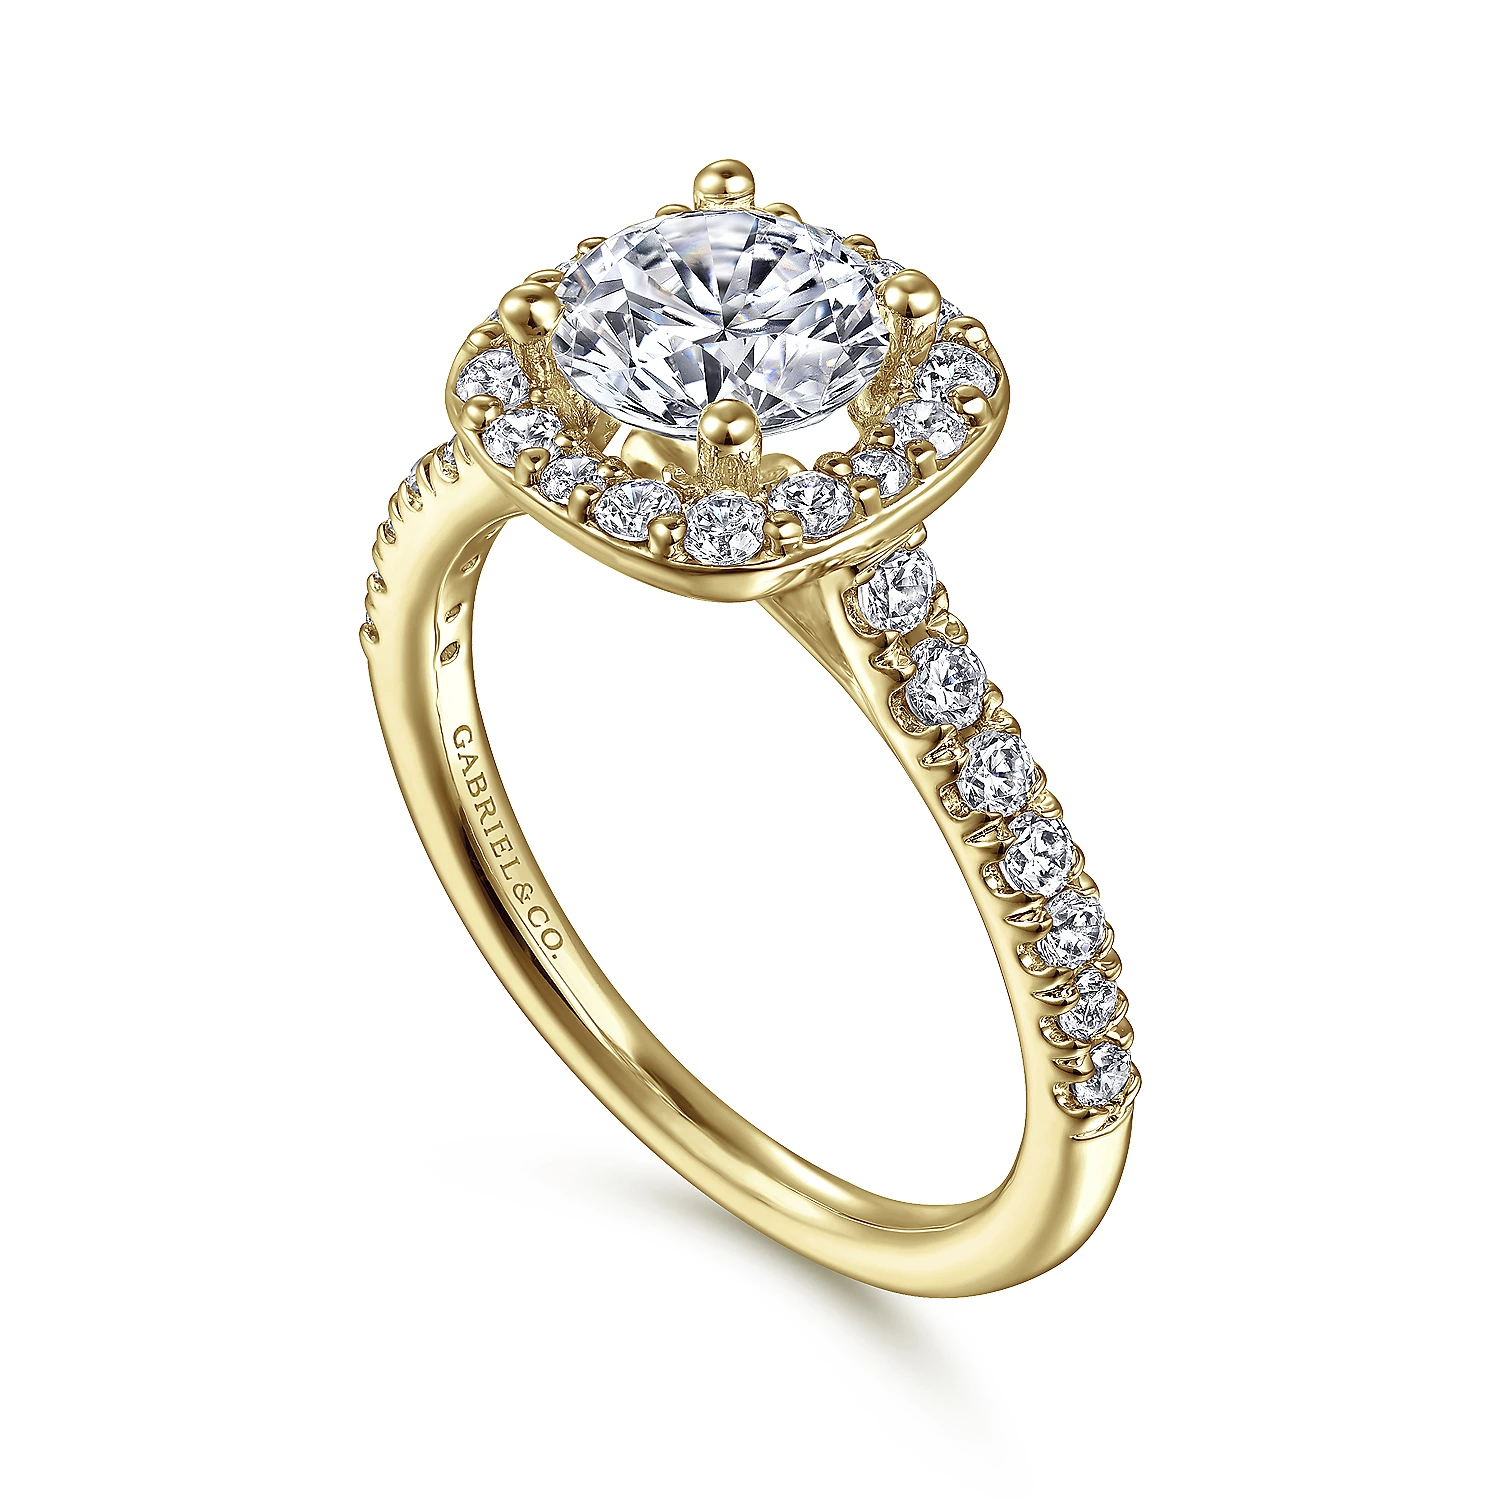 OOAK Champagne Diamond Engagement Ring with Organic Golden Accenting –  ARTEMER